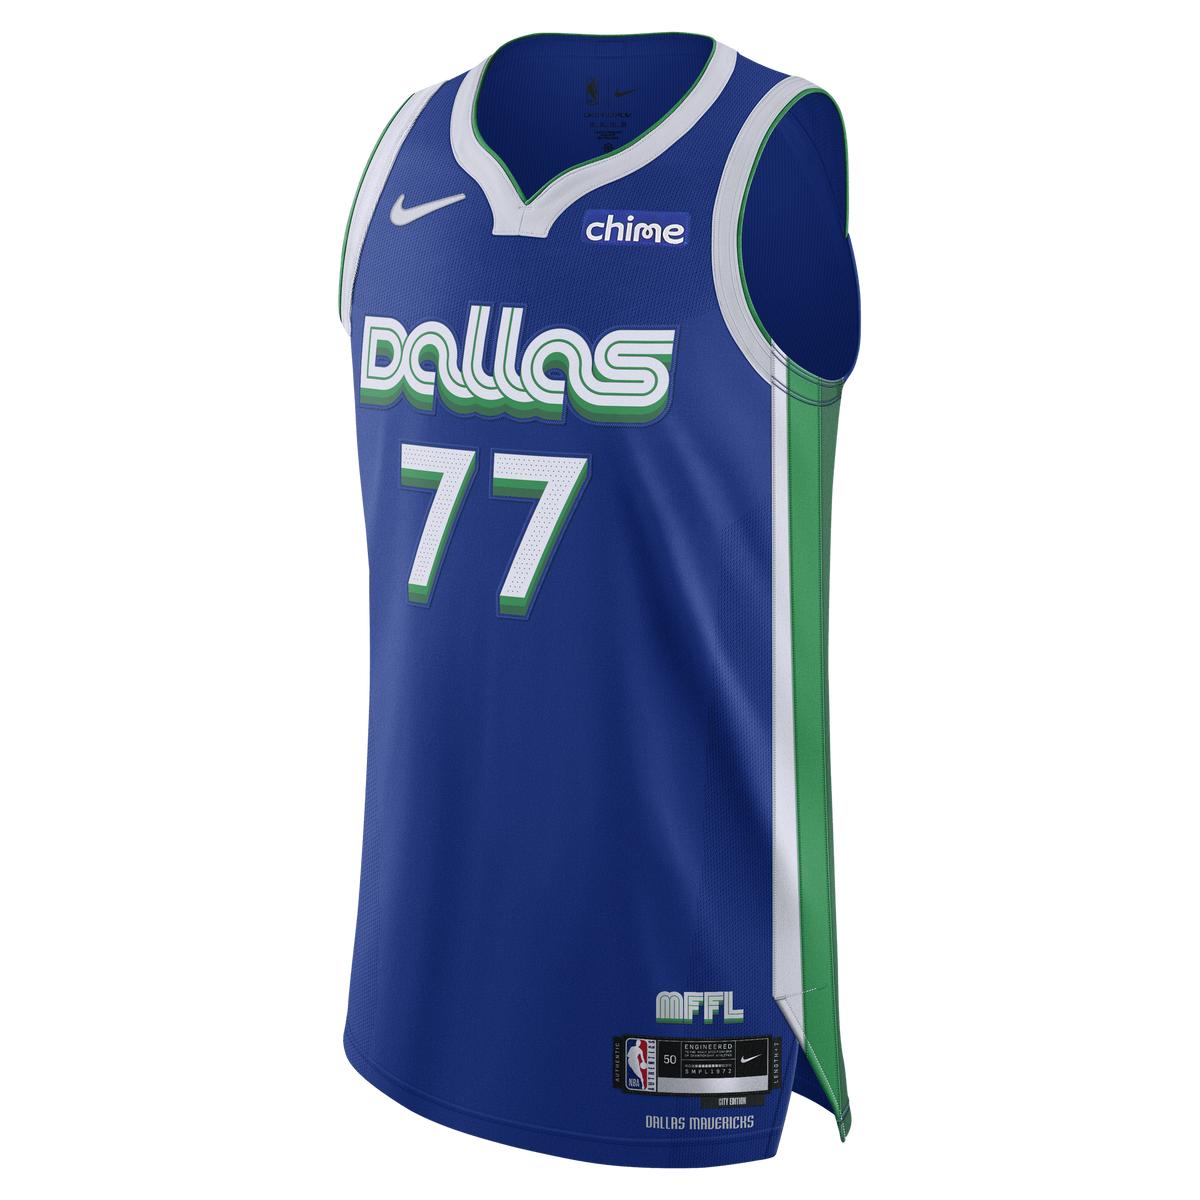 luka doncic city jersey